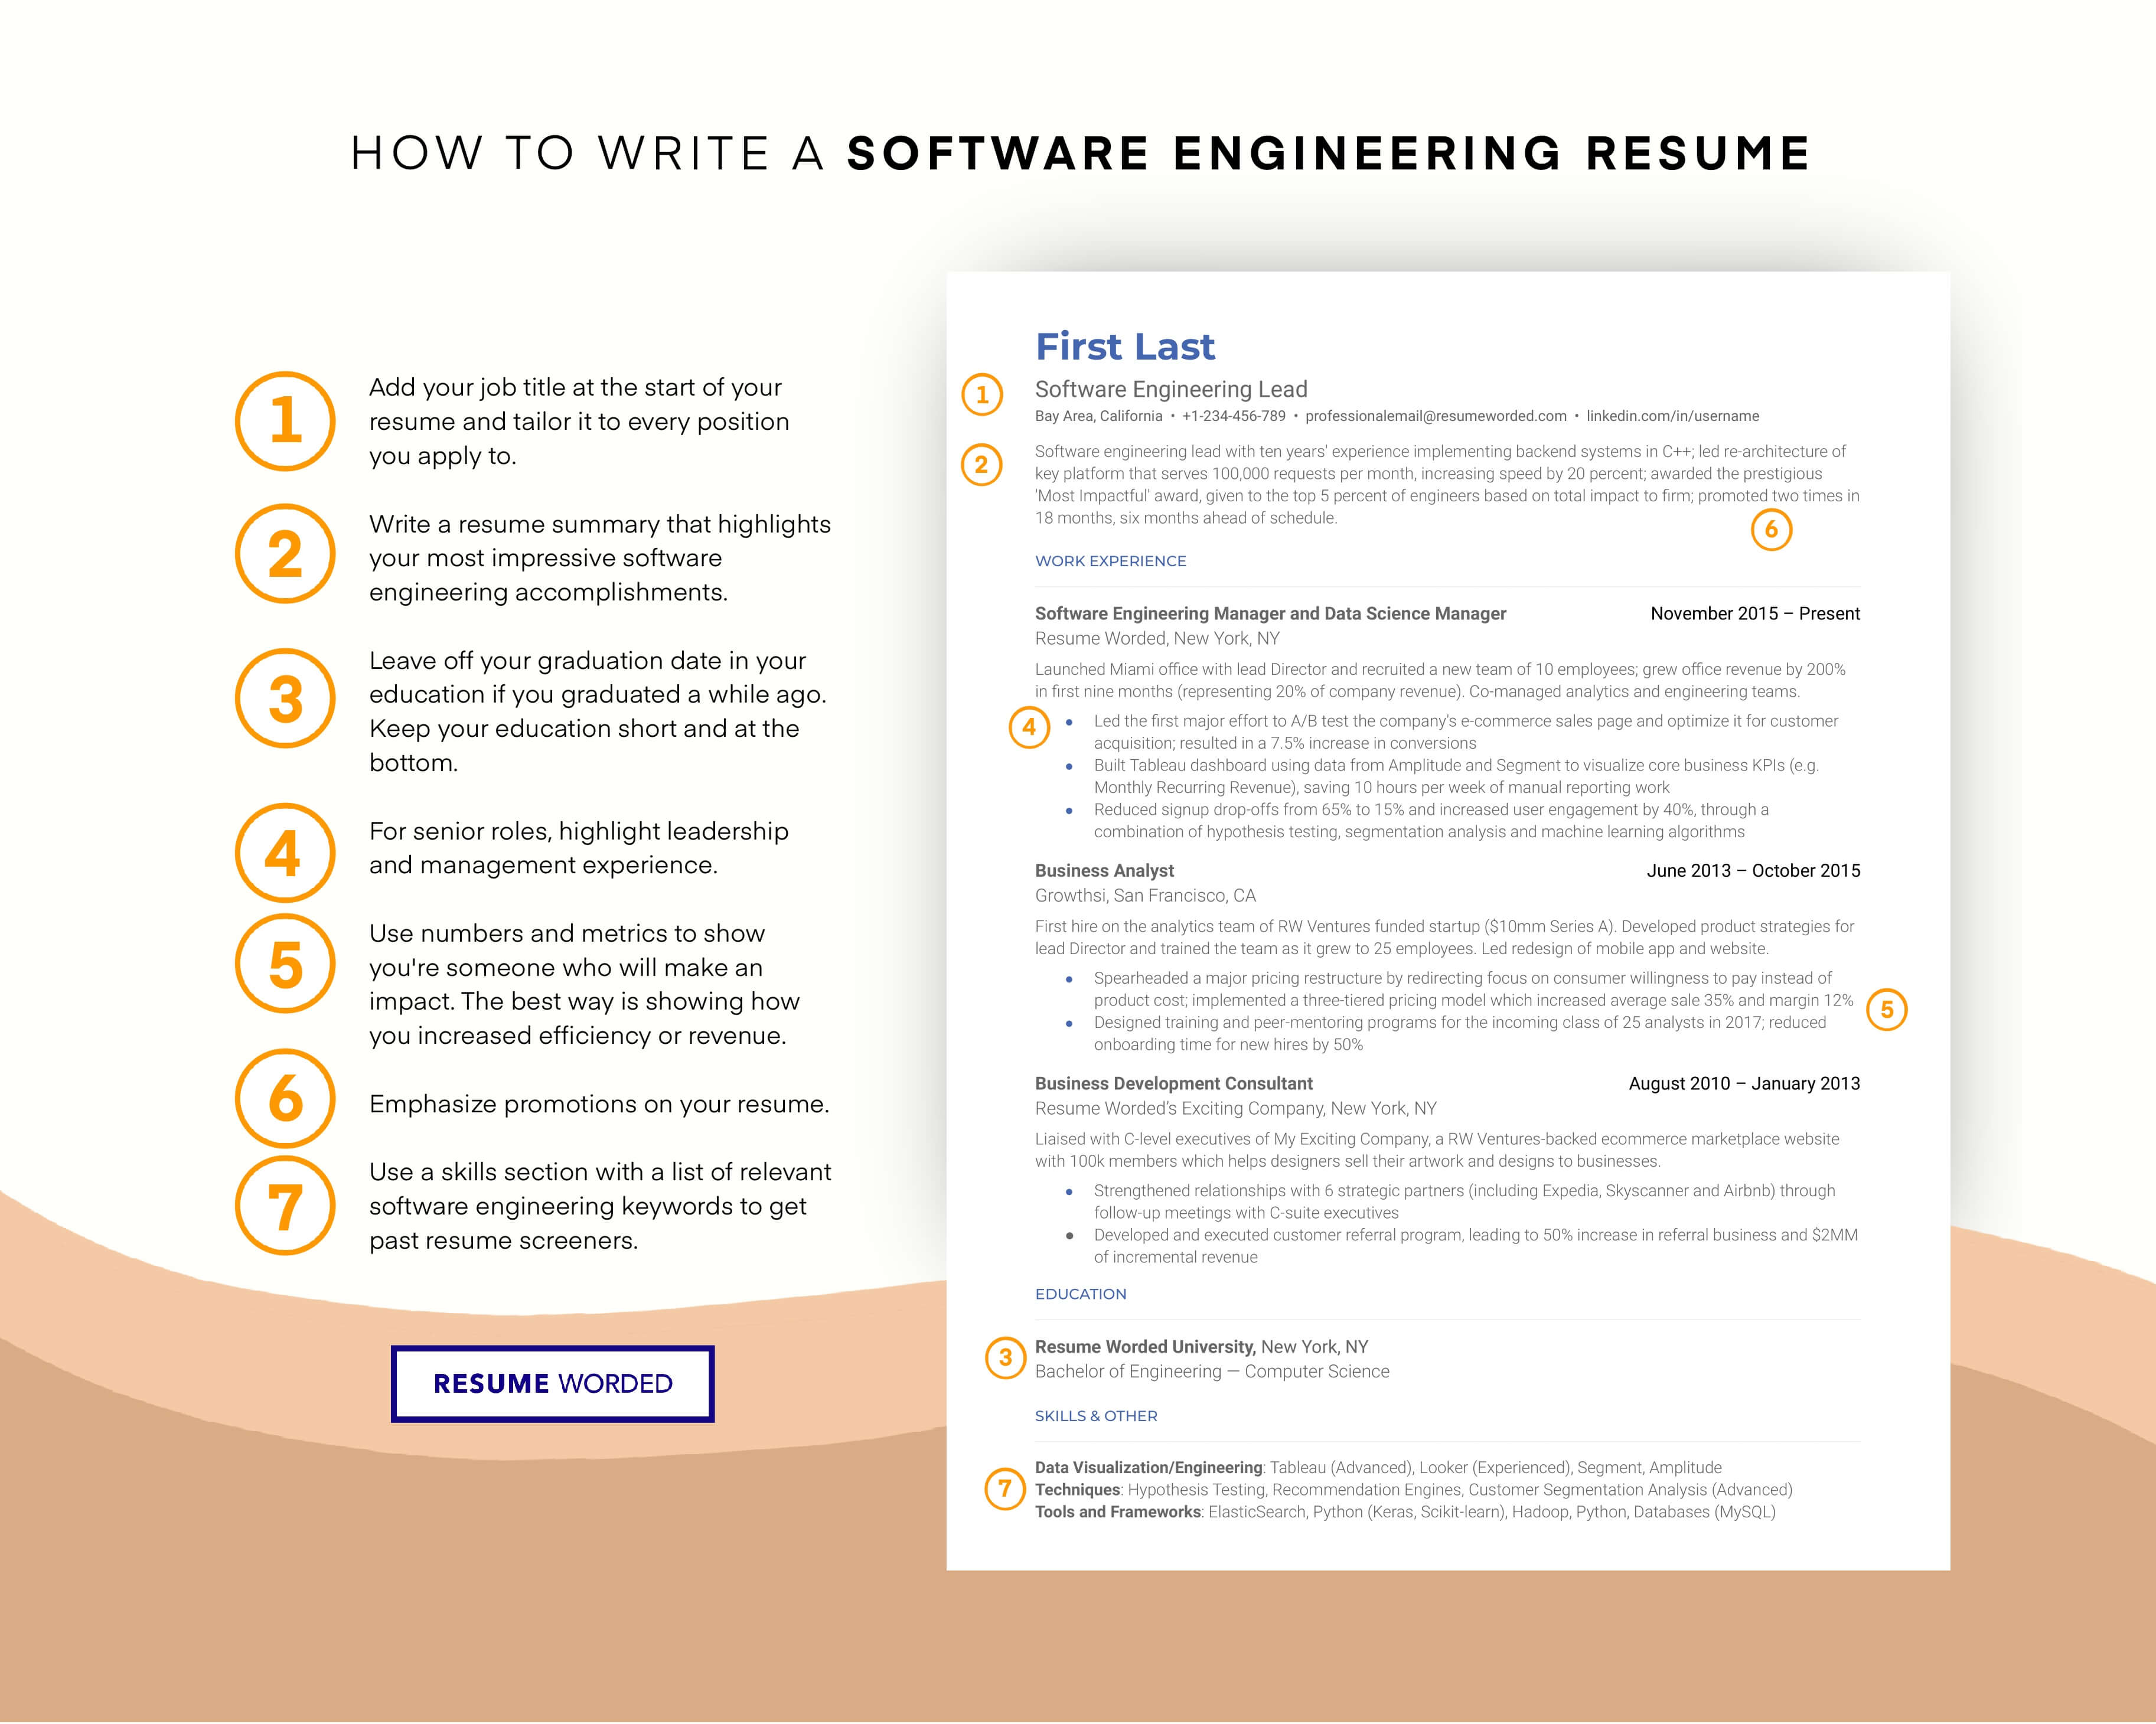 List marketing software and languages. - Brand Activation Manager Resume